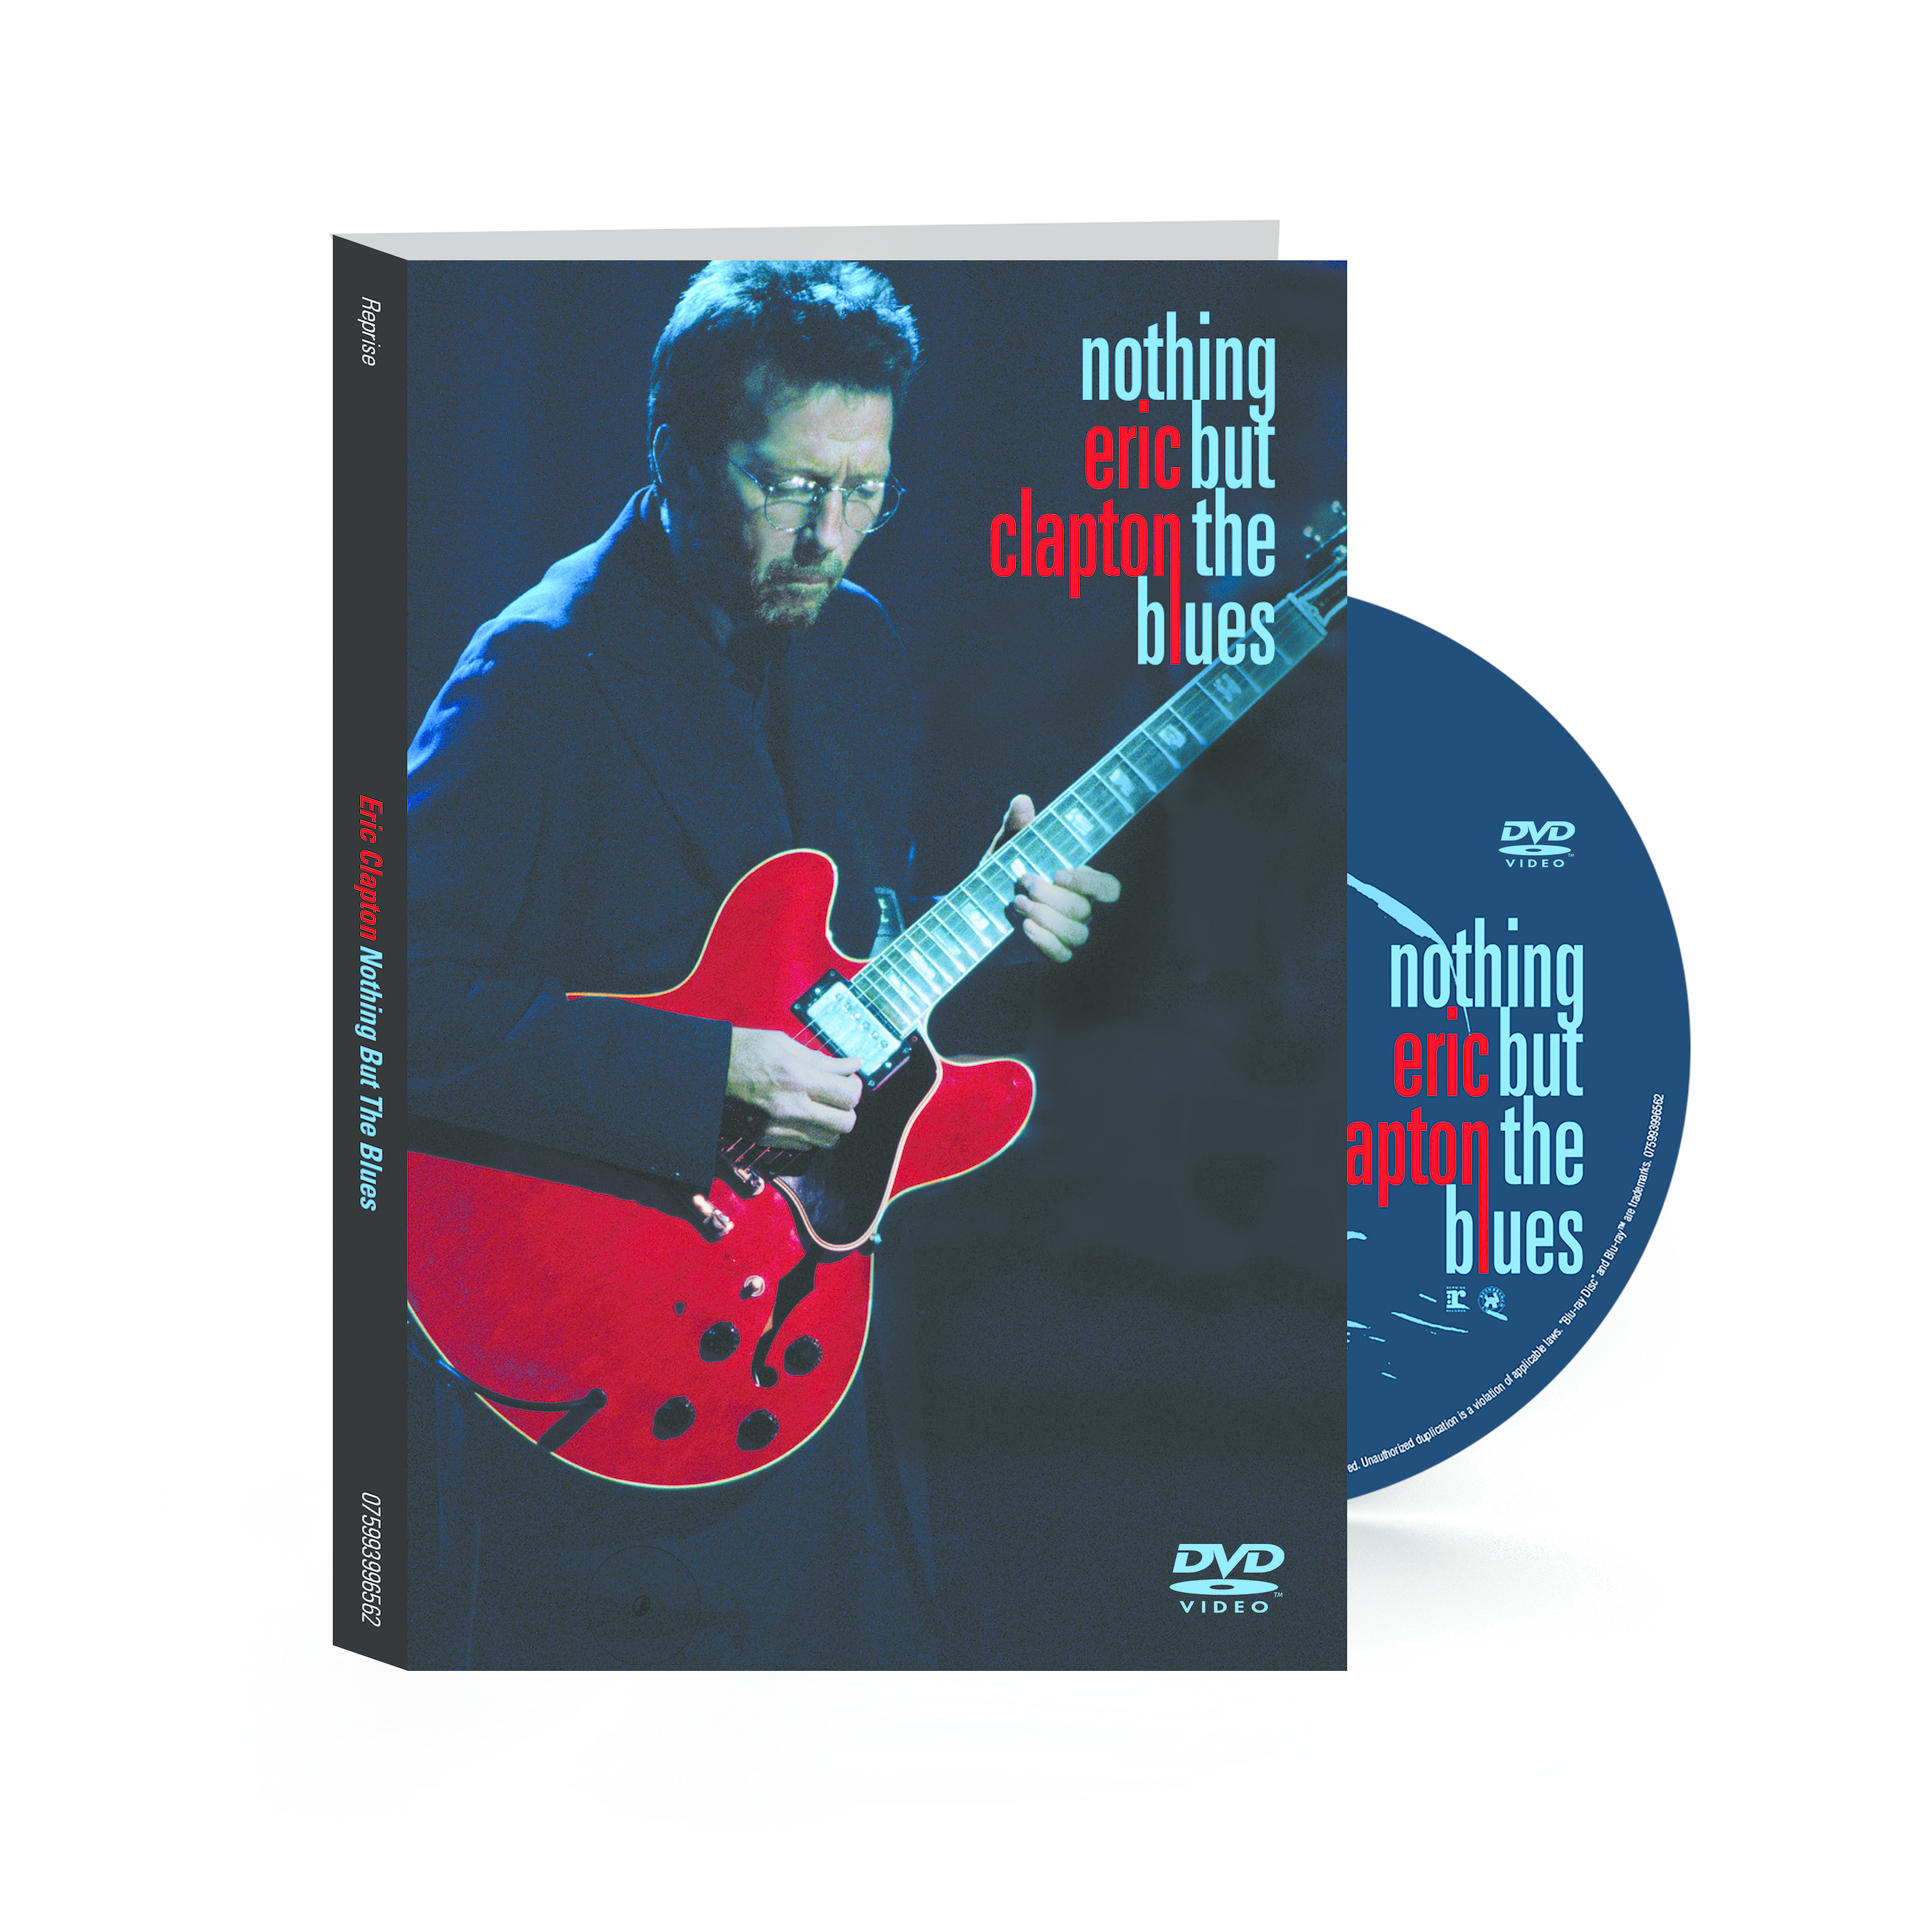 Eric Clapton - NOTHING BLUES - BUT THE (DVD)